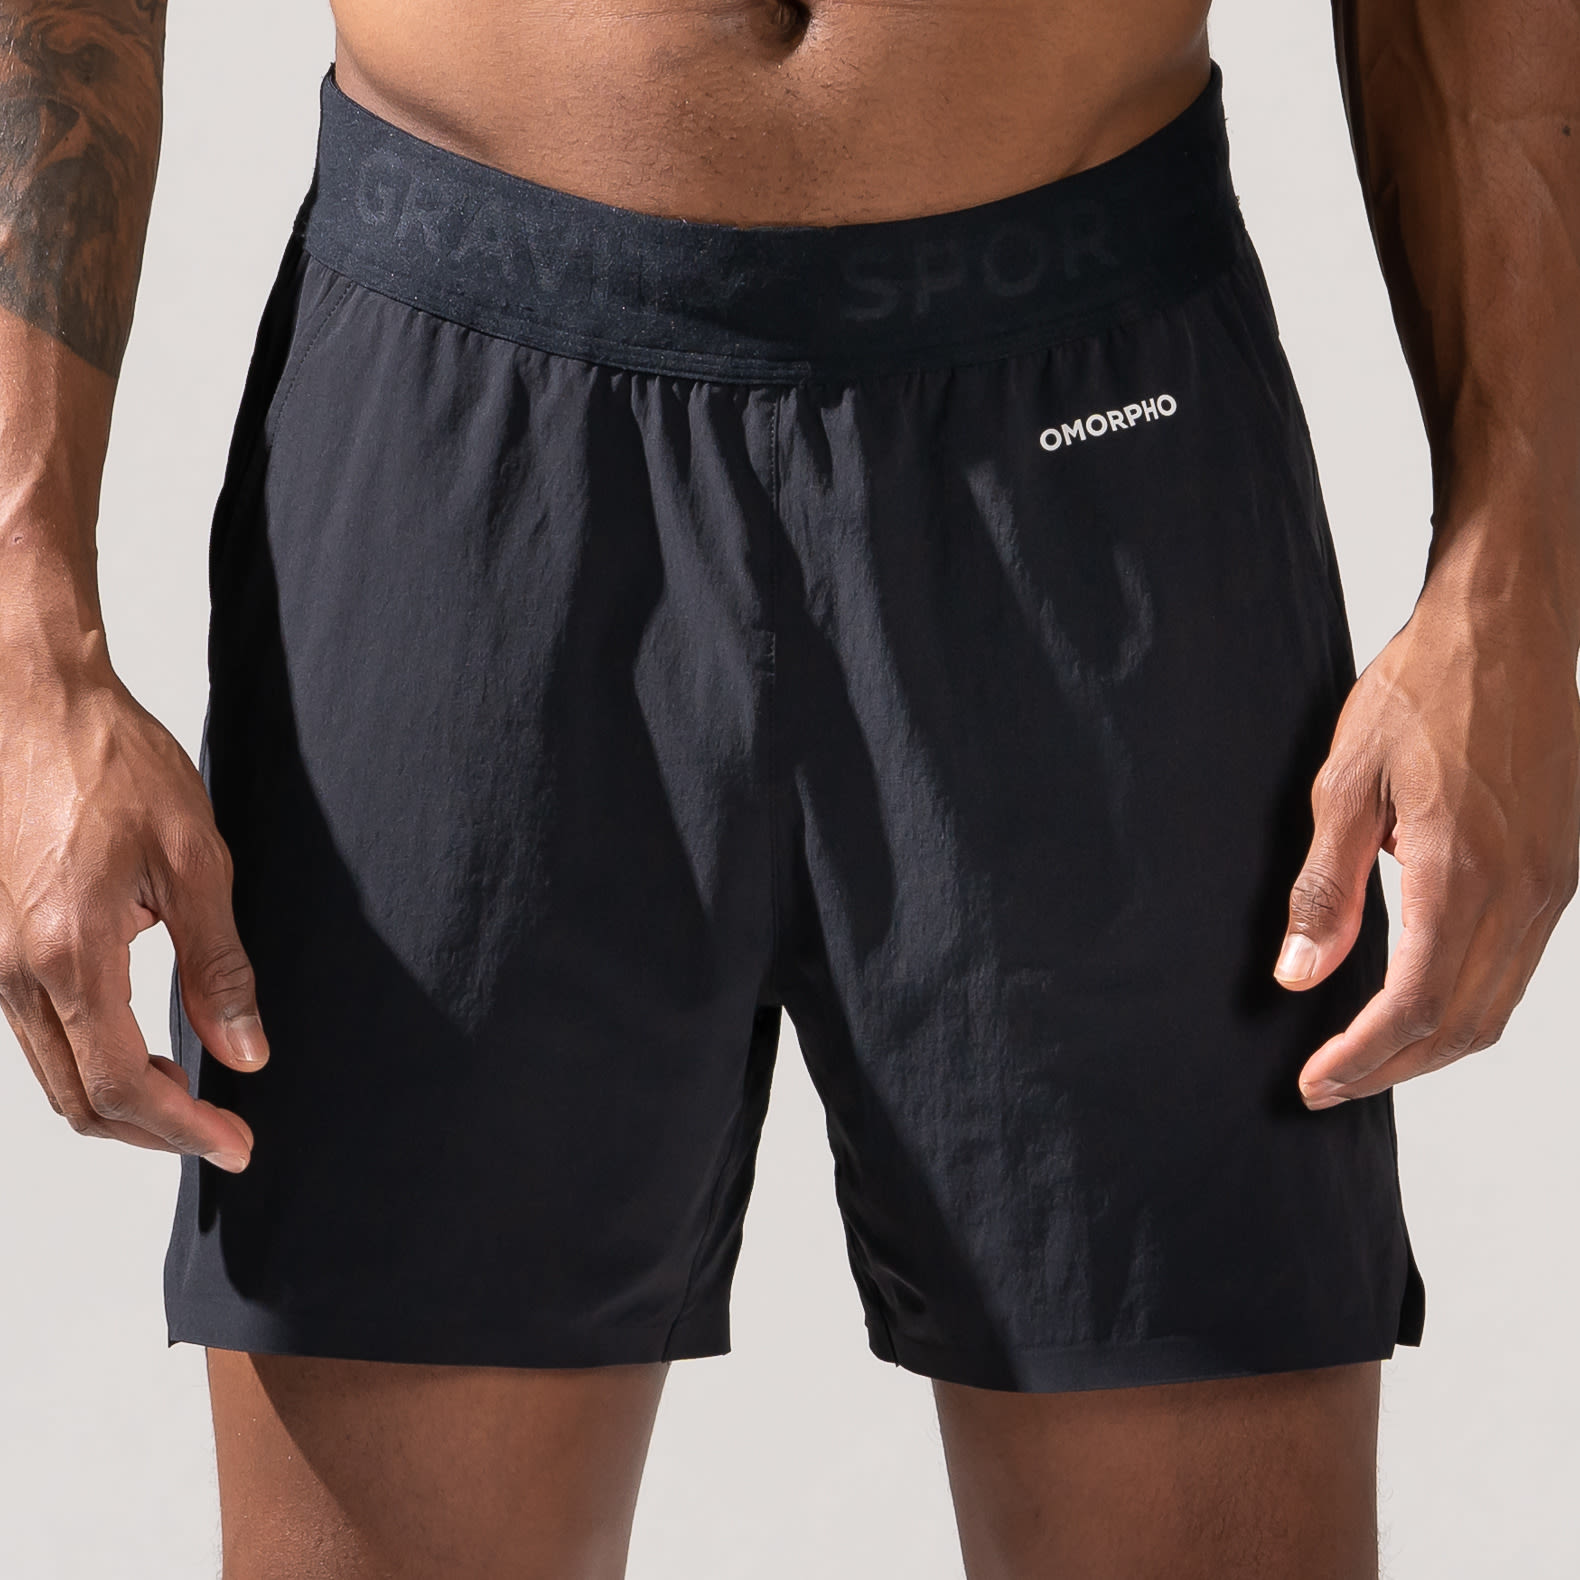 Close-up Front view of Male wearing OMORPHO Black O-Short gym shorts